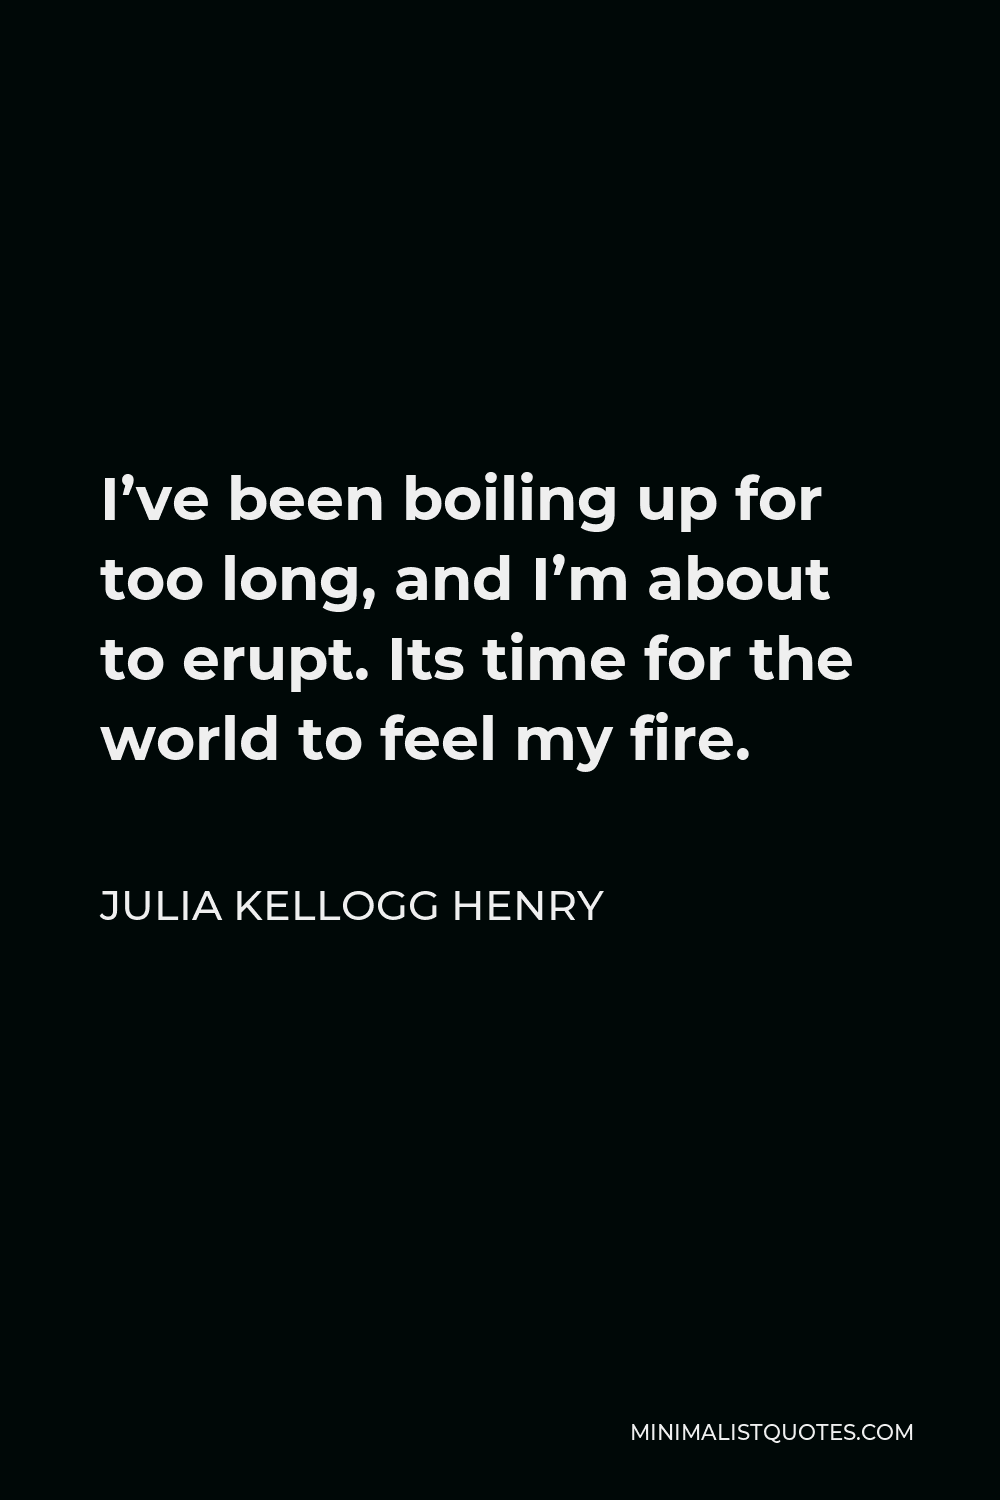 Julia Kellogg Henry Quote - I’ve been boiling up for too long, and I’m about to erupt. Its time for the world to feel my fire.